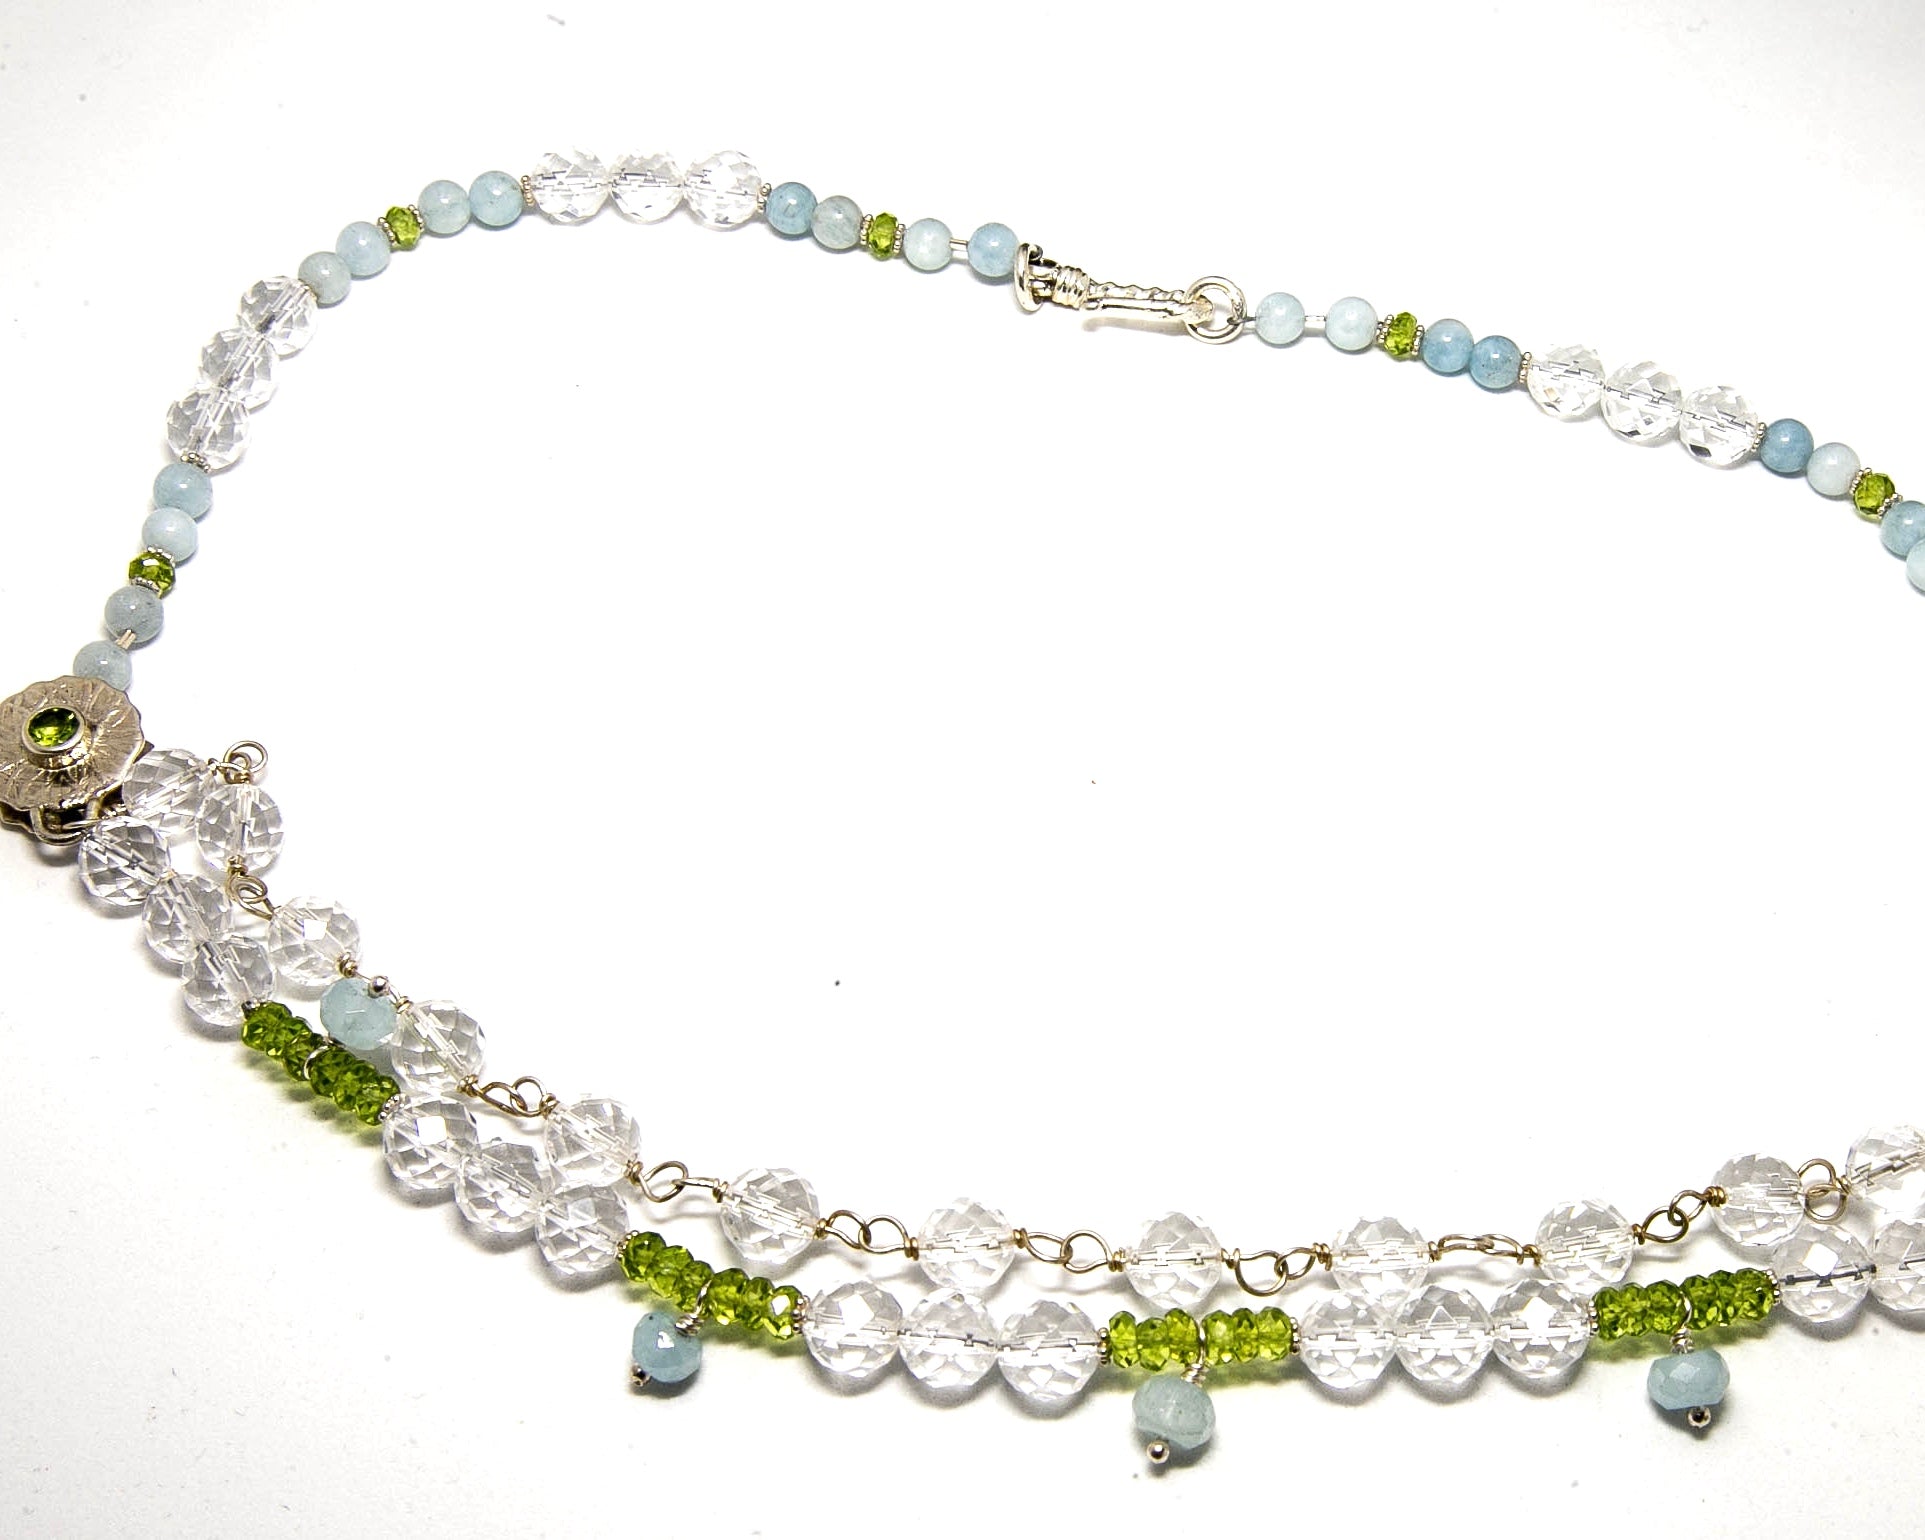 Clear Quartz, Peridot and Aquamarine two strand necklace with sterling silver hook closure.